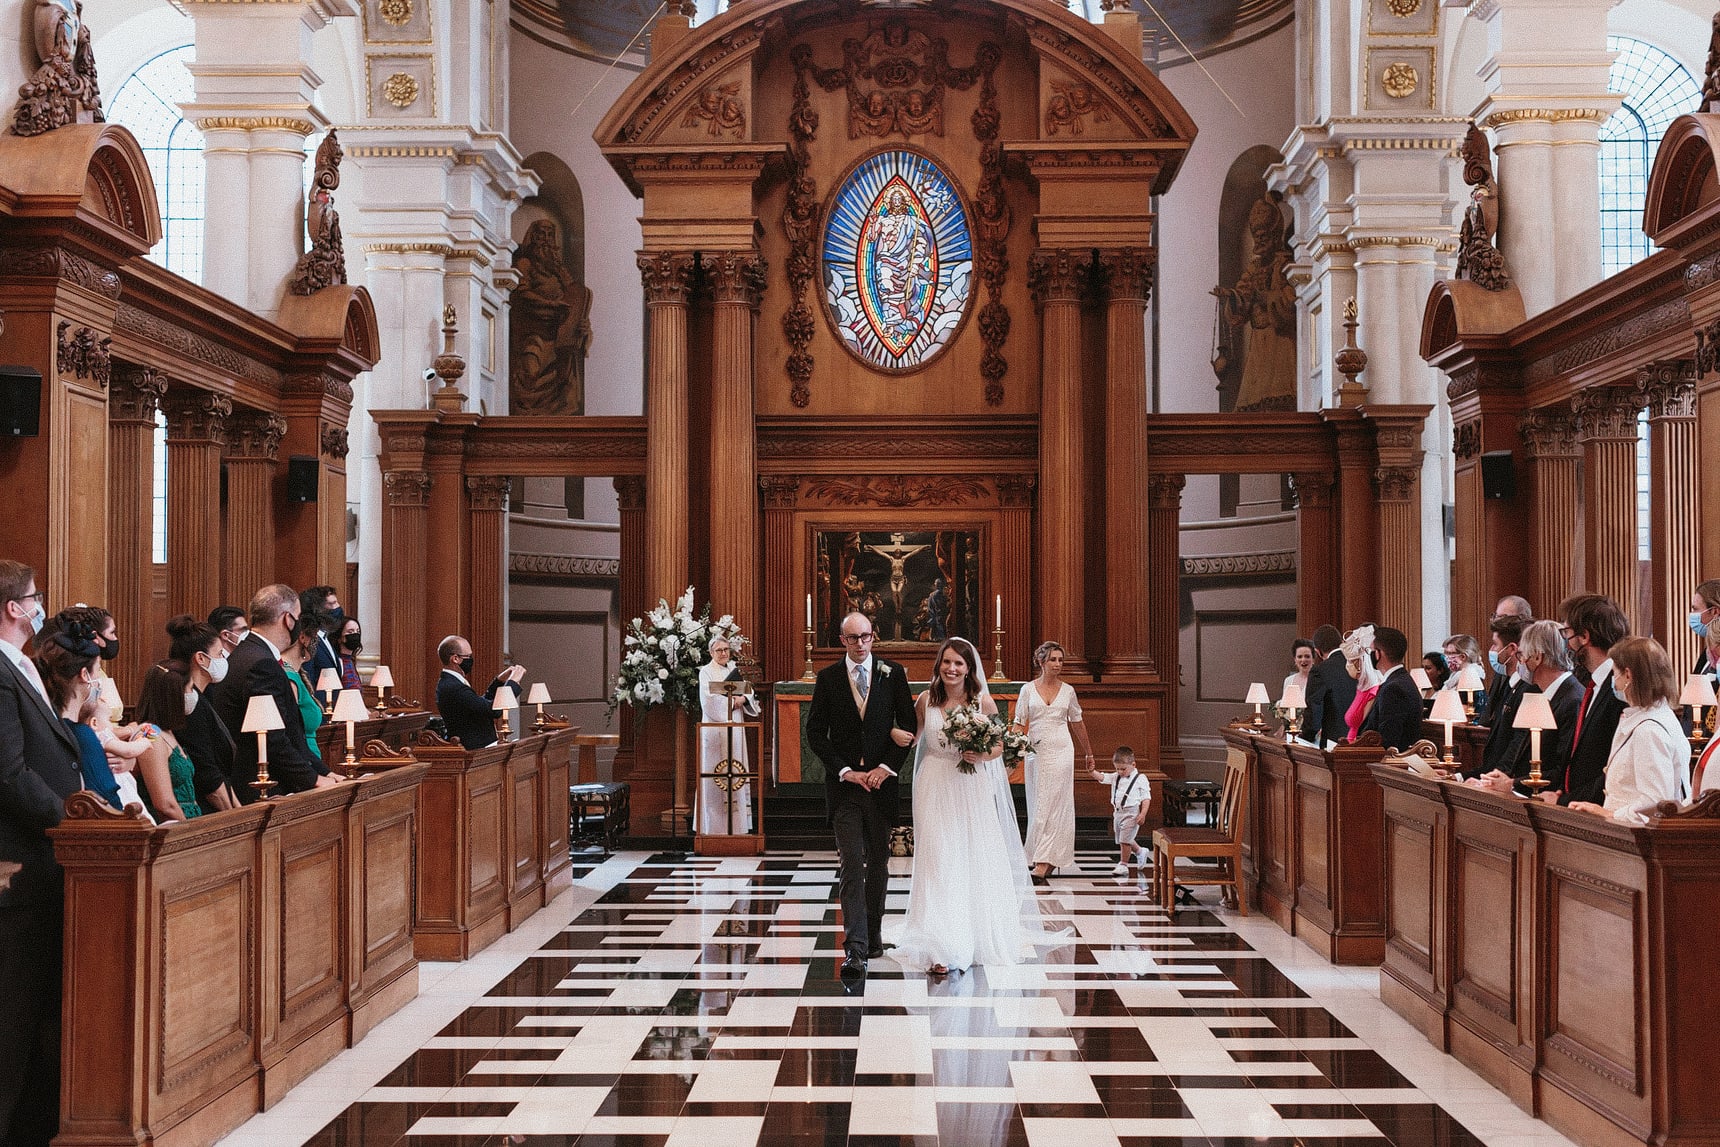 Bride and groom walking down the aisle in a large church in London